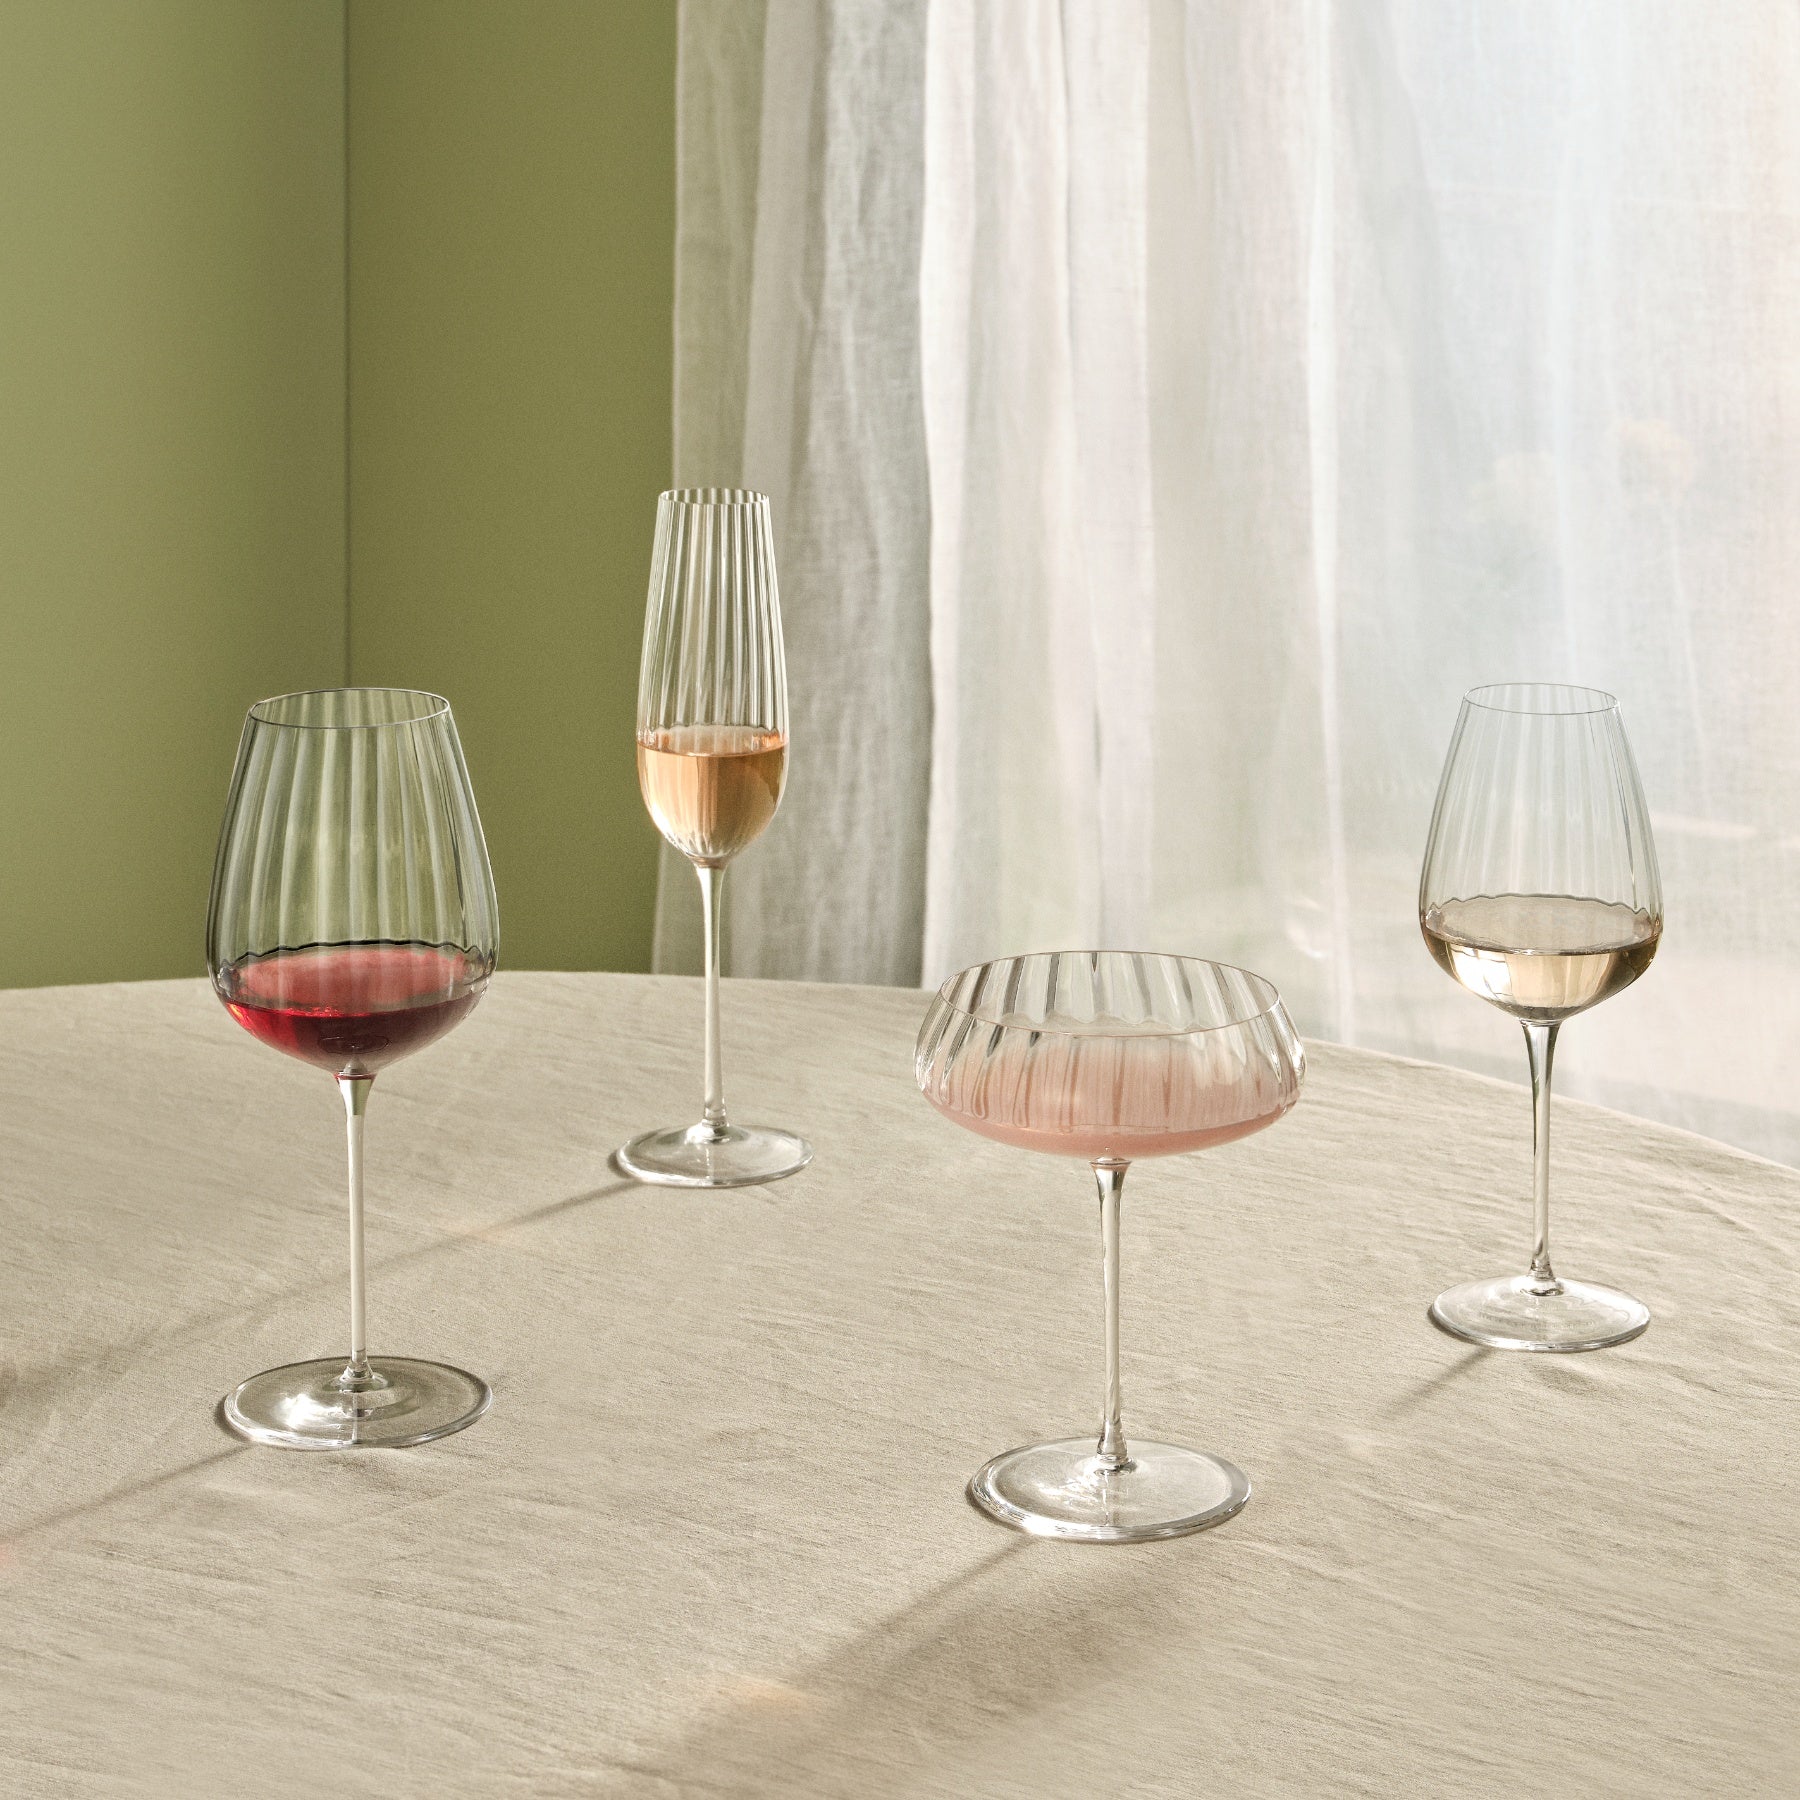 Nude Glass - Round Up White Wine Glasses - Set of 2 Clear